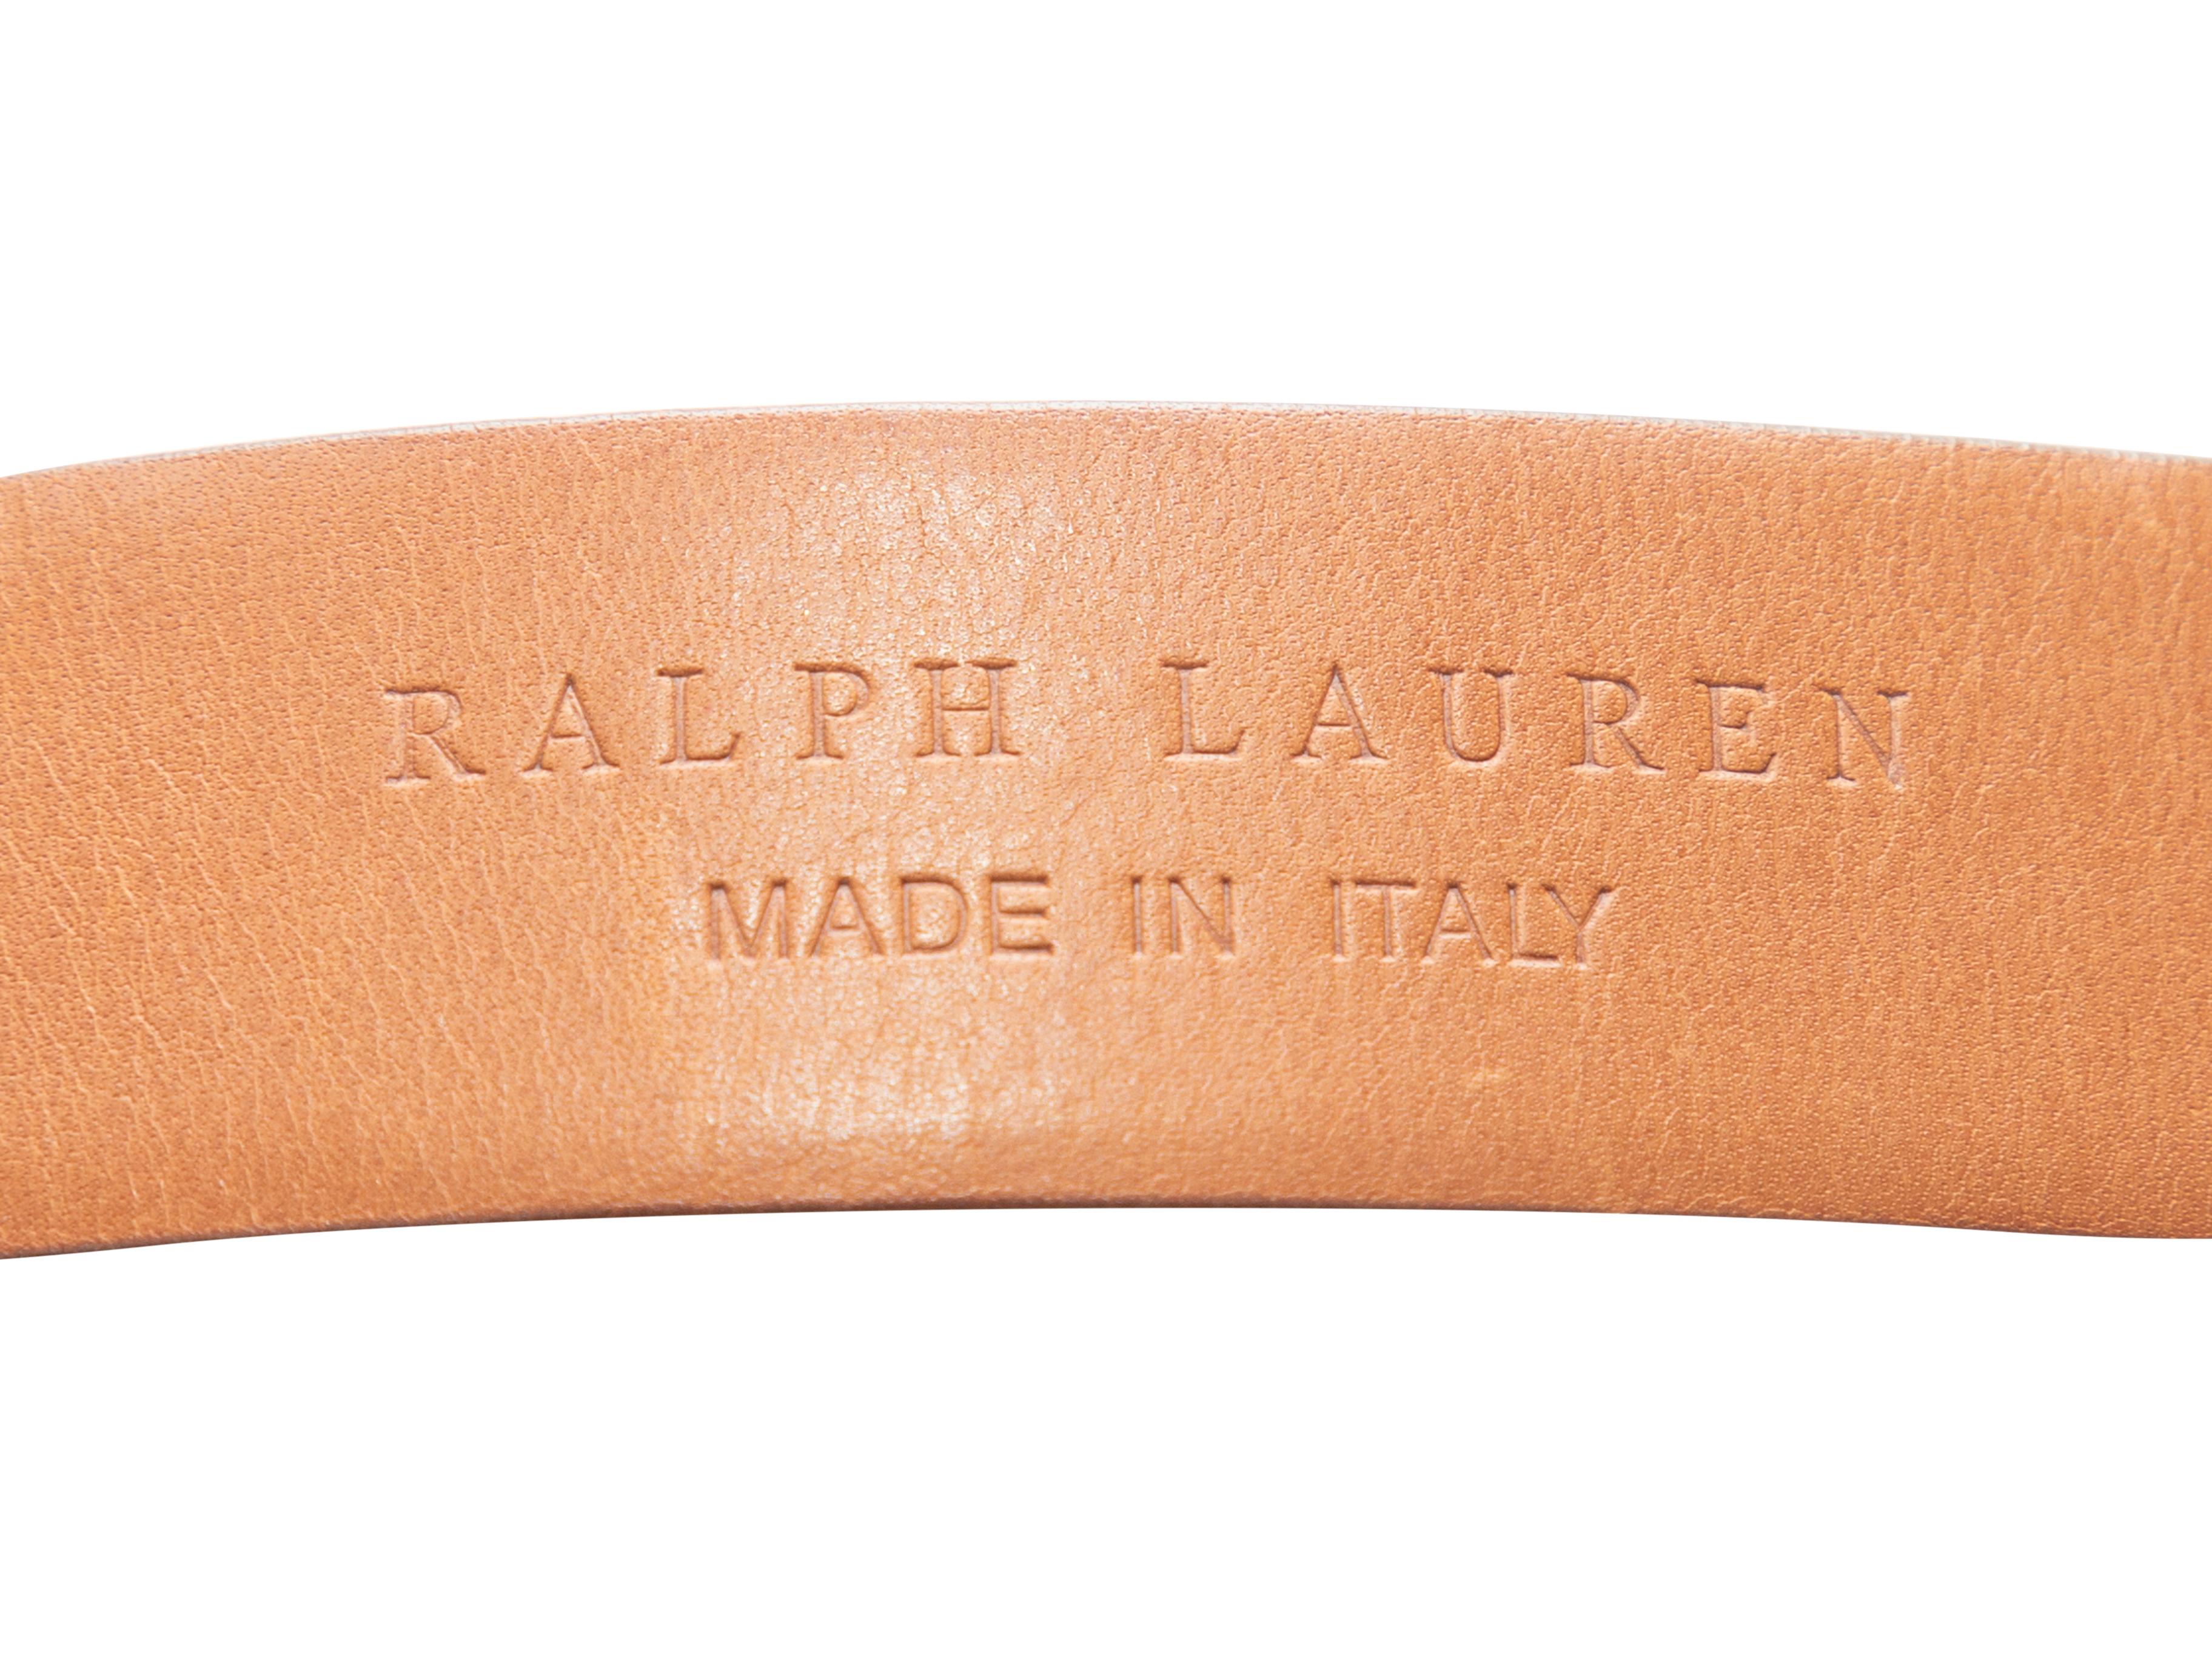 Product Details: Tan leather belt by Ralph Lauren. Large silver-tone buckle closure at front. 2